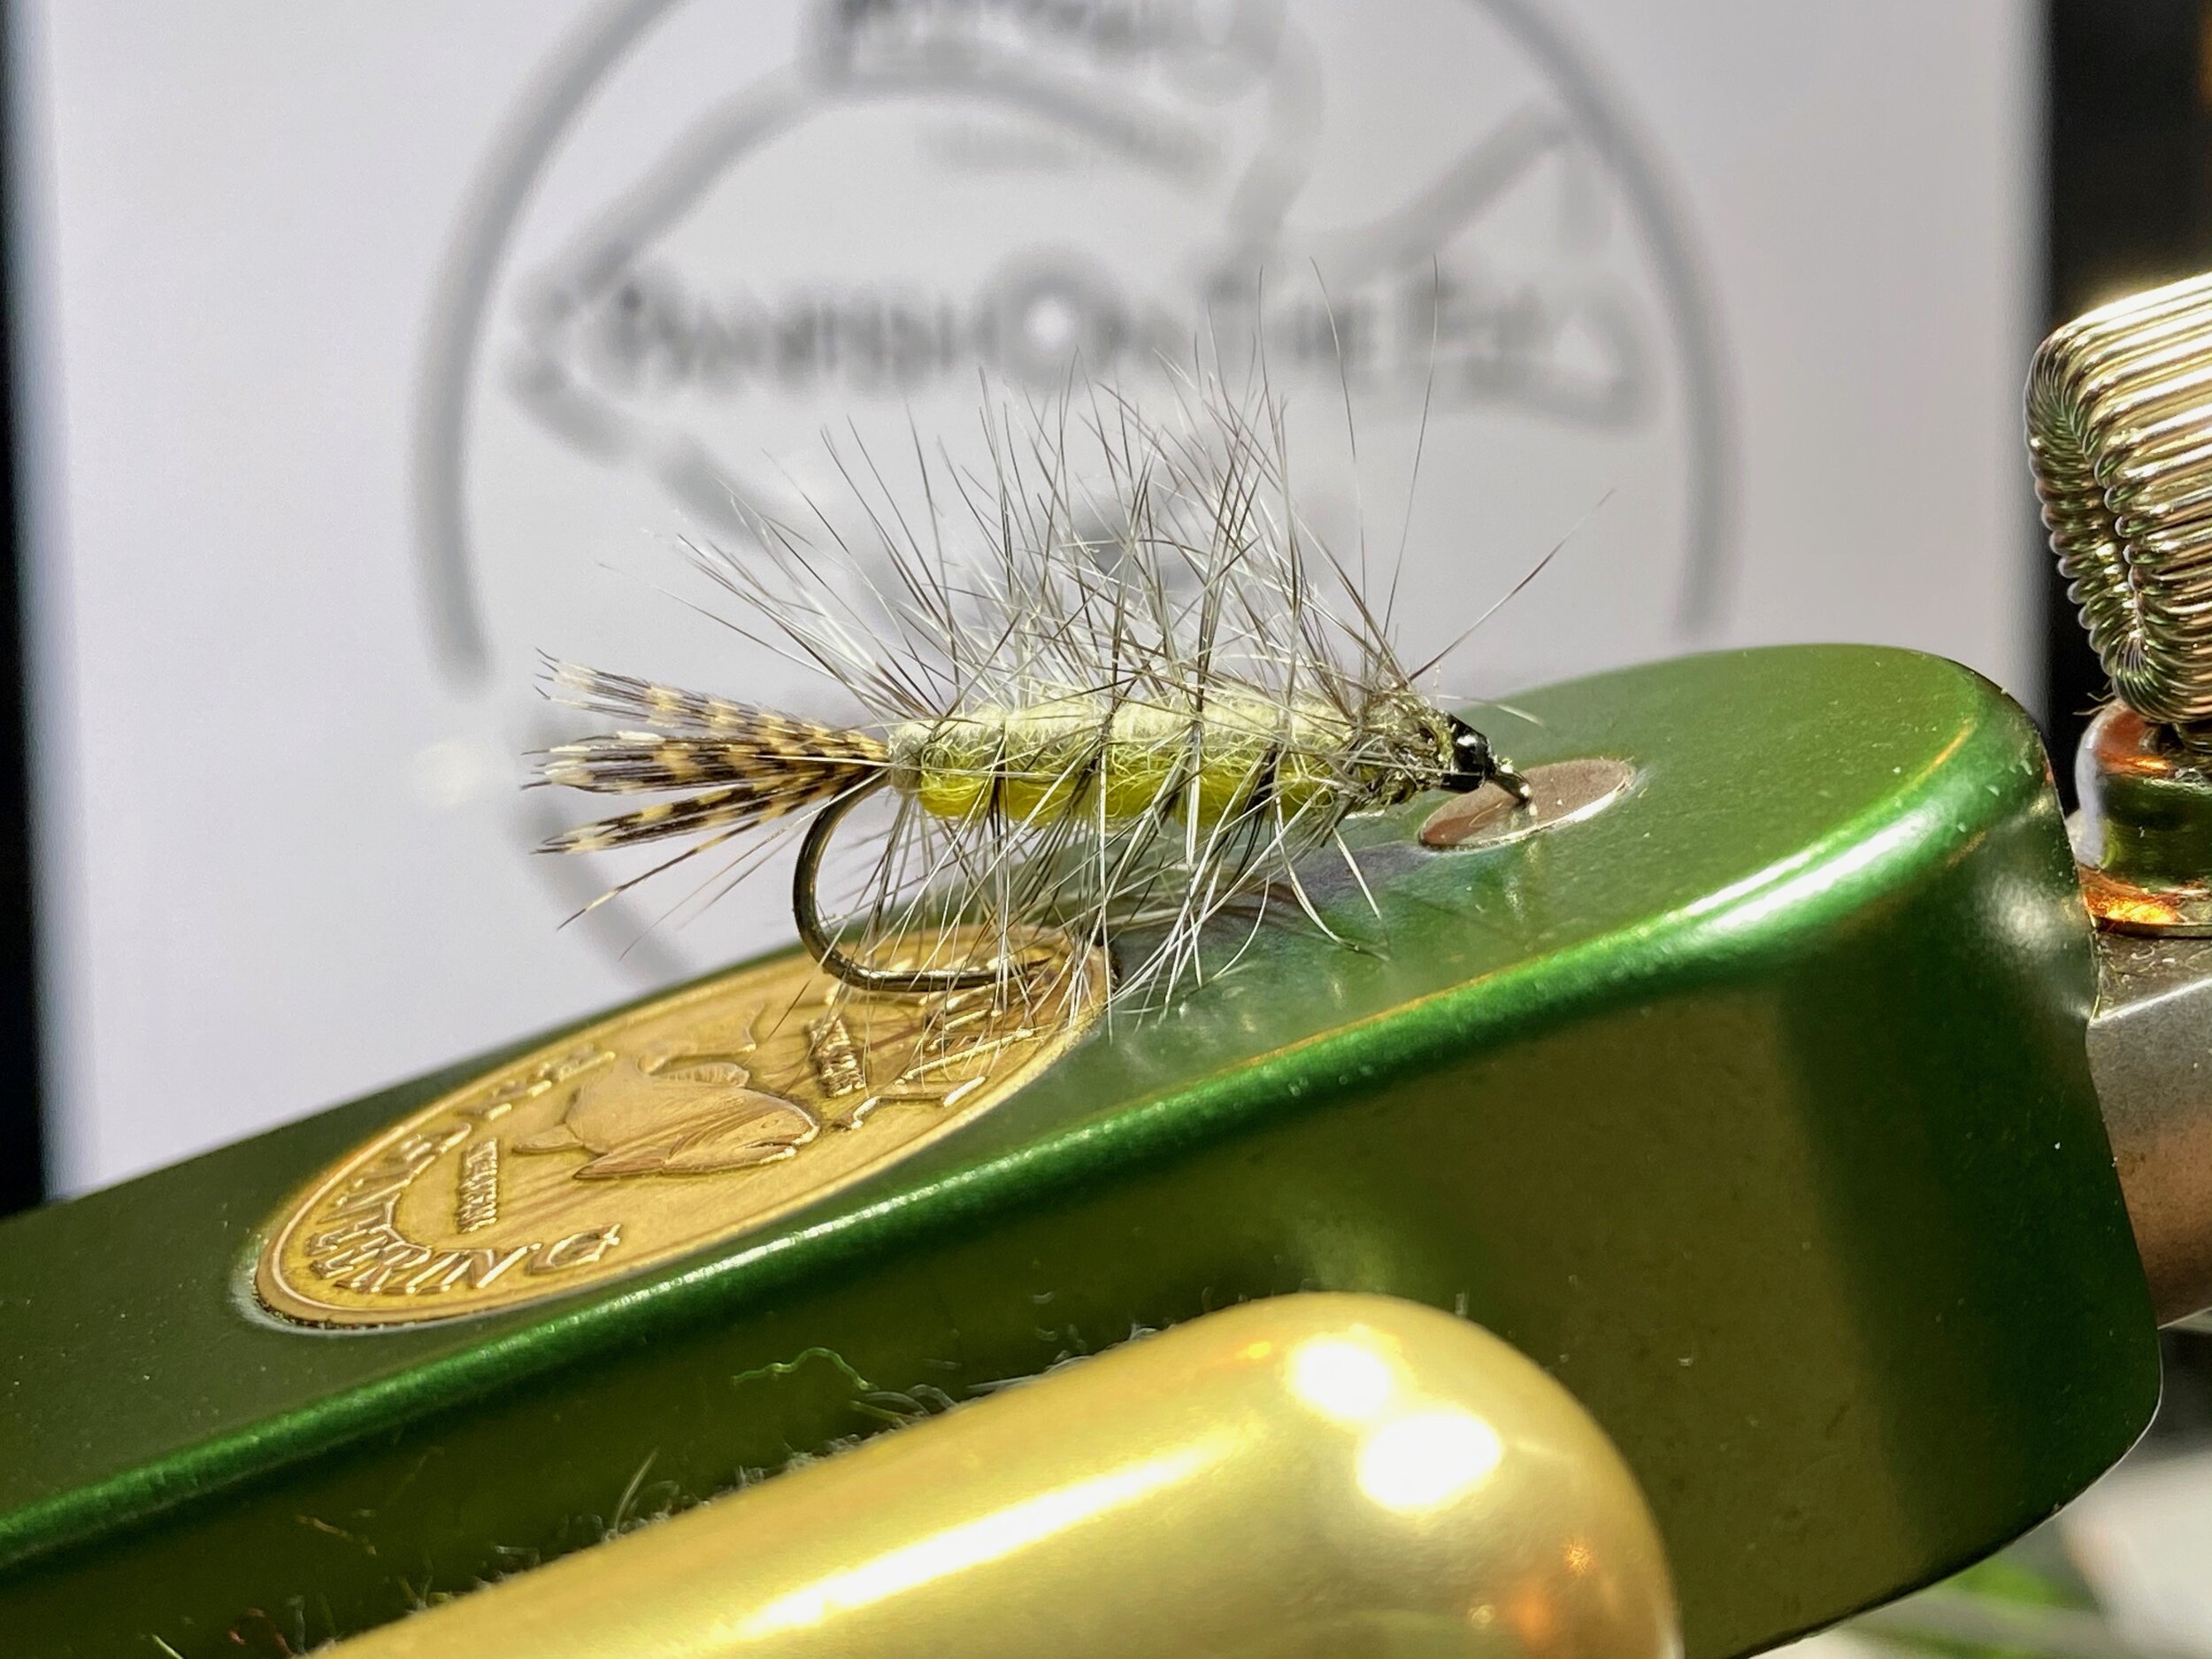 A classic panfish fly with an unusual name - Tom Nixon's .56%er